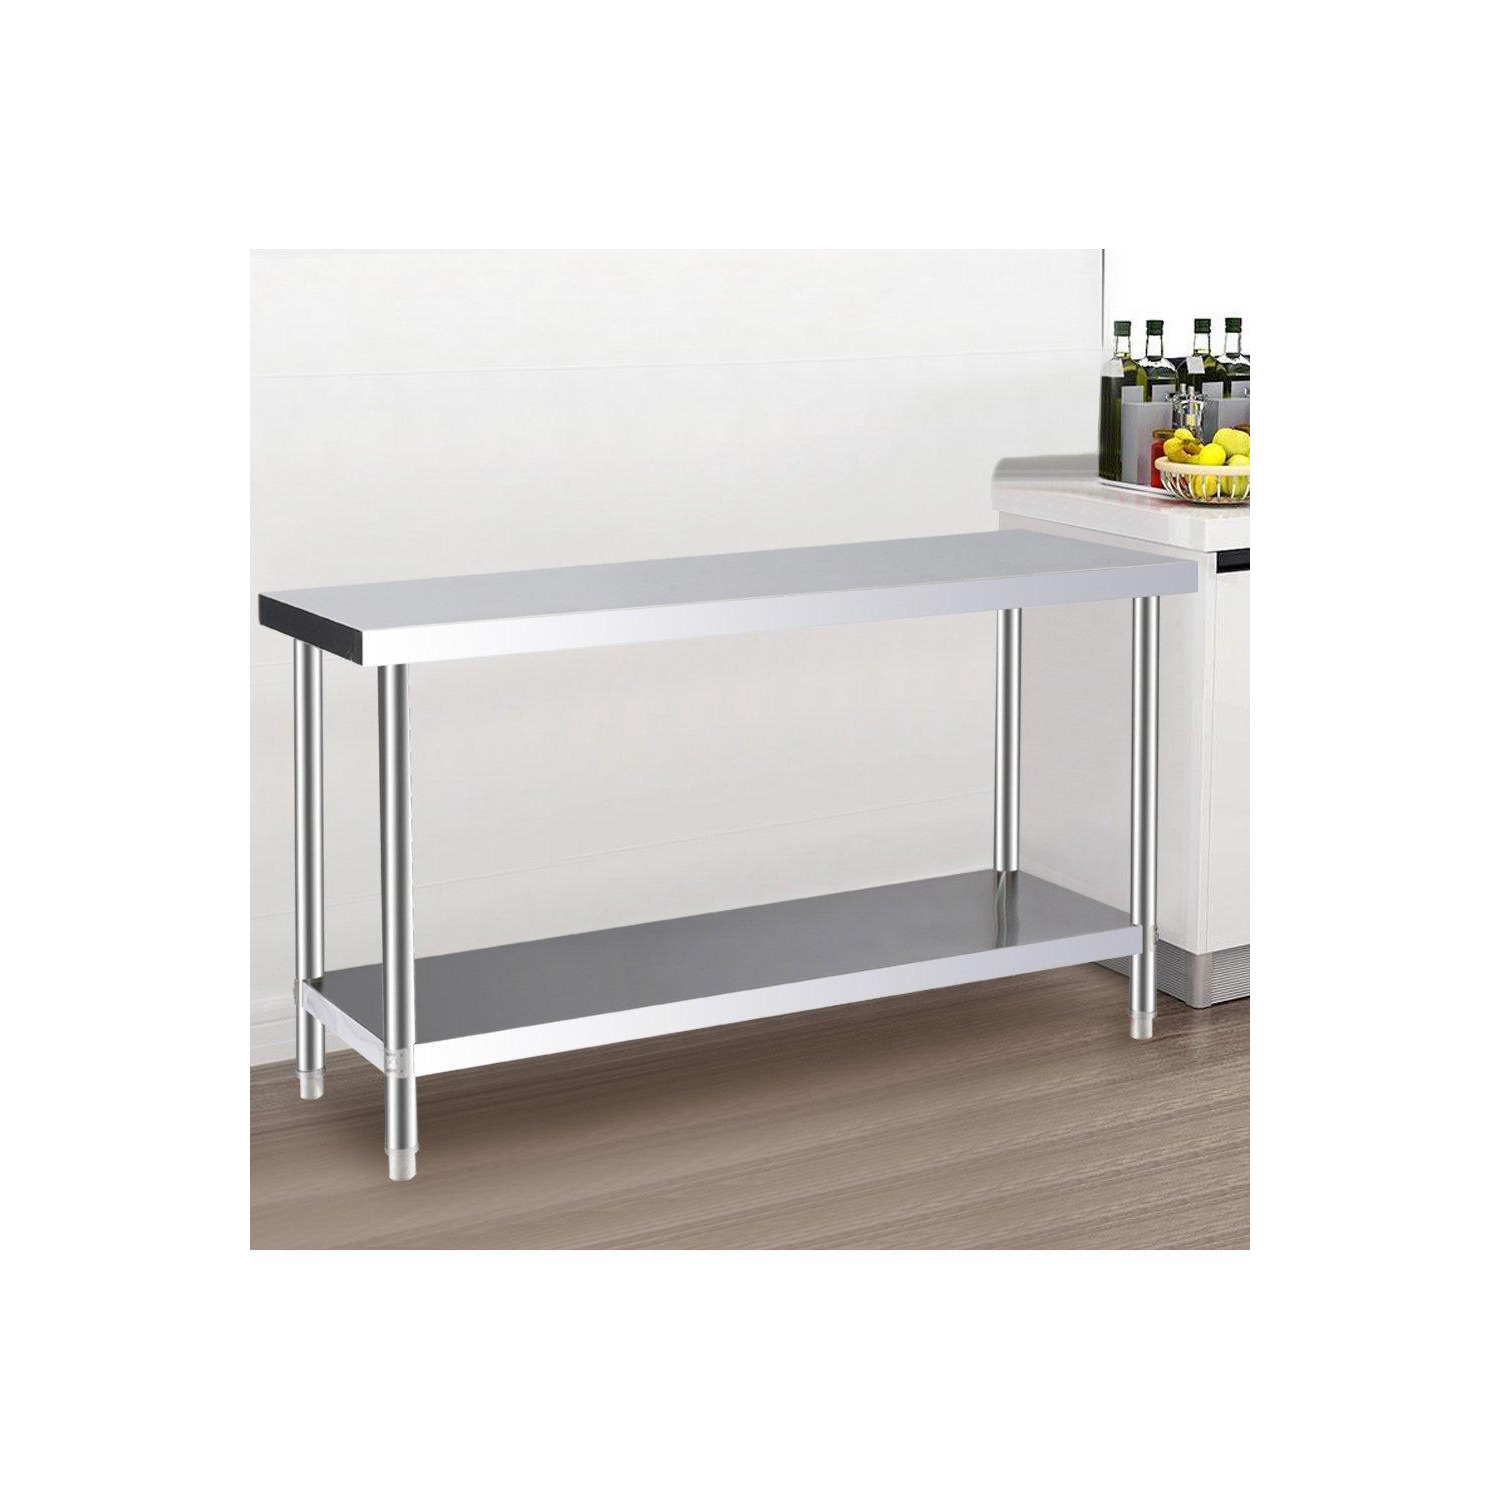 Stainless Steel Work Table with Undershelf - image 1